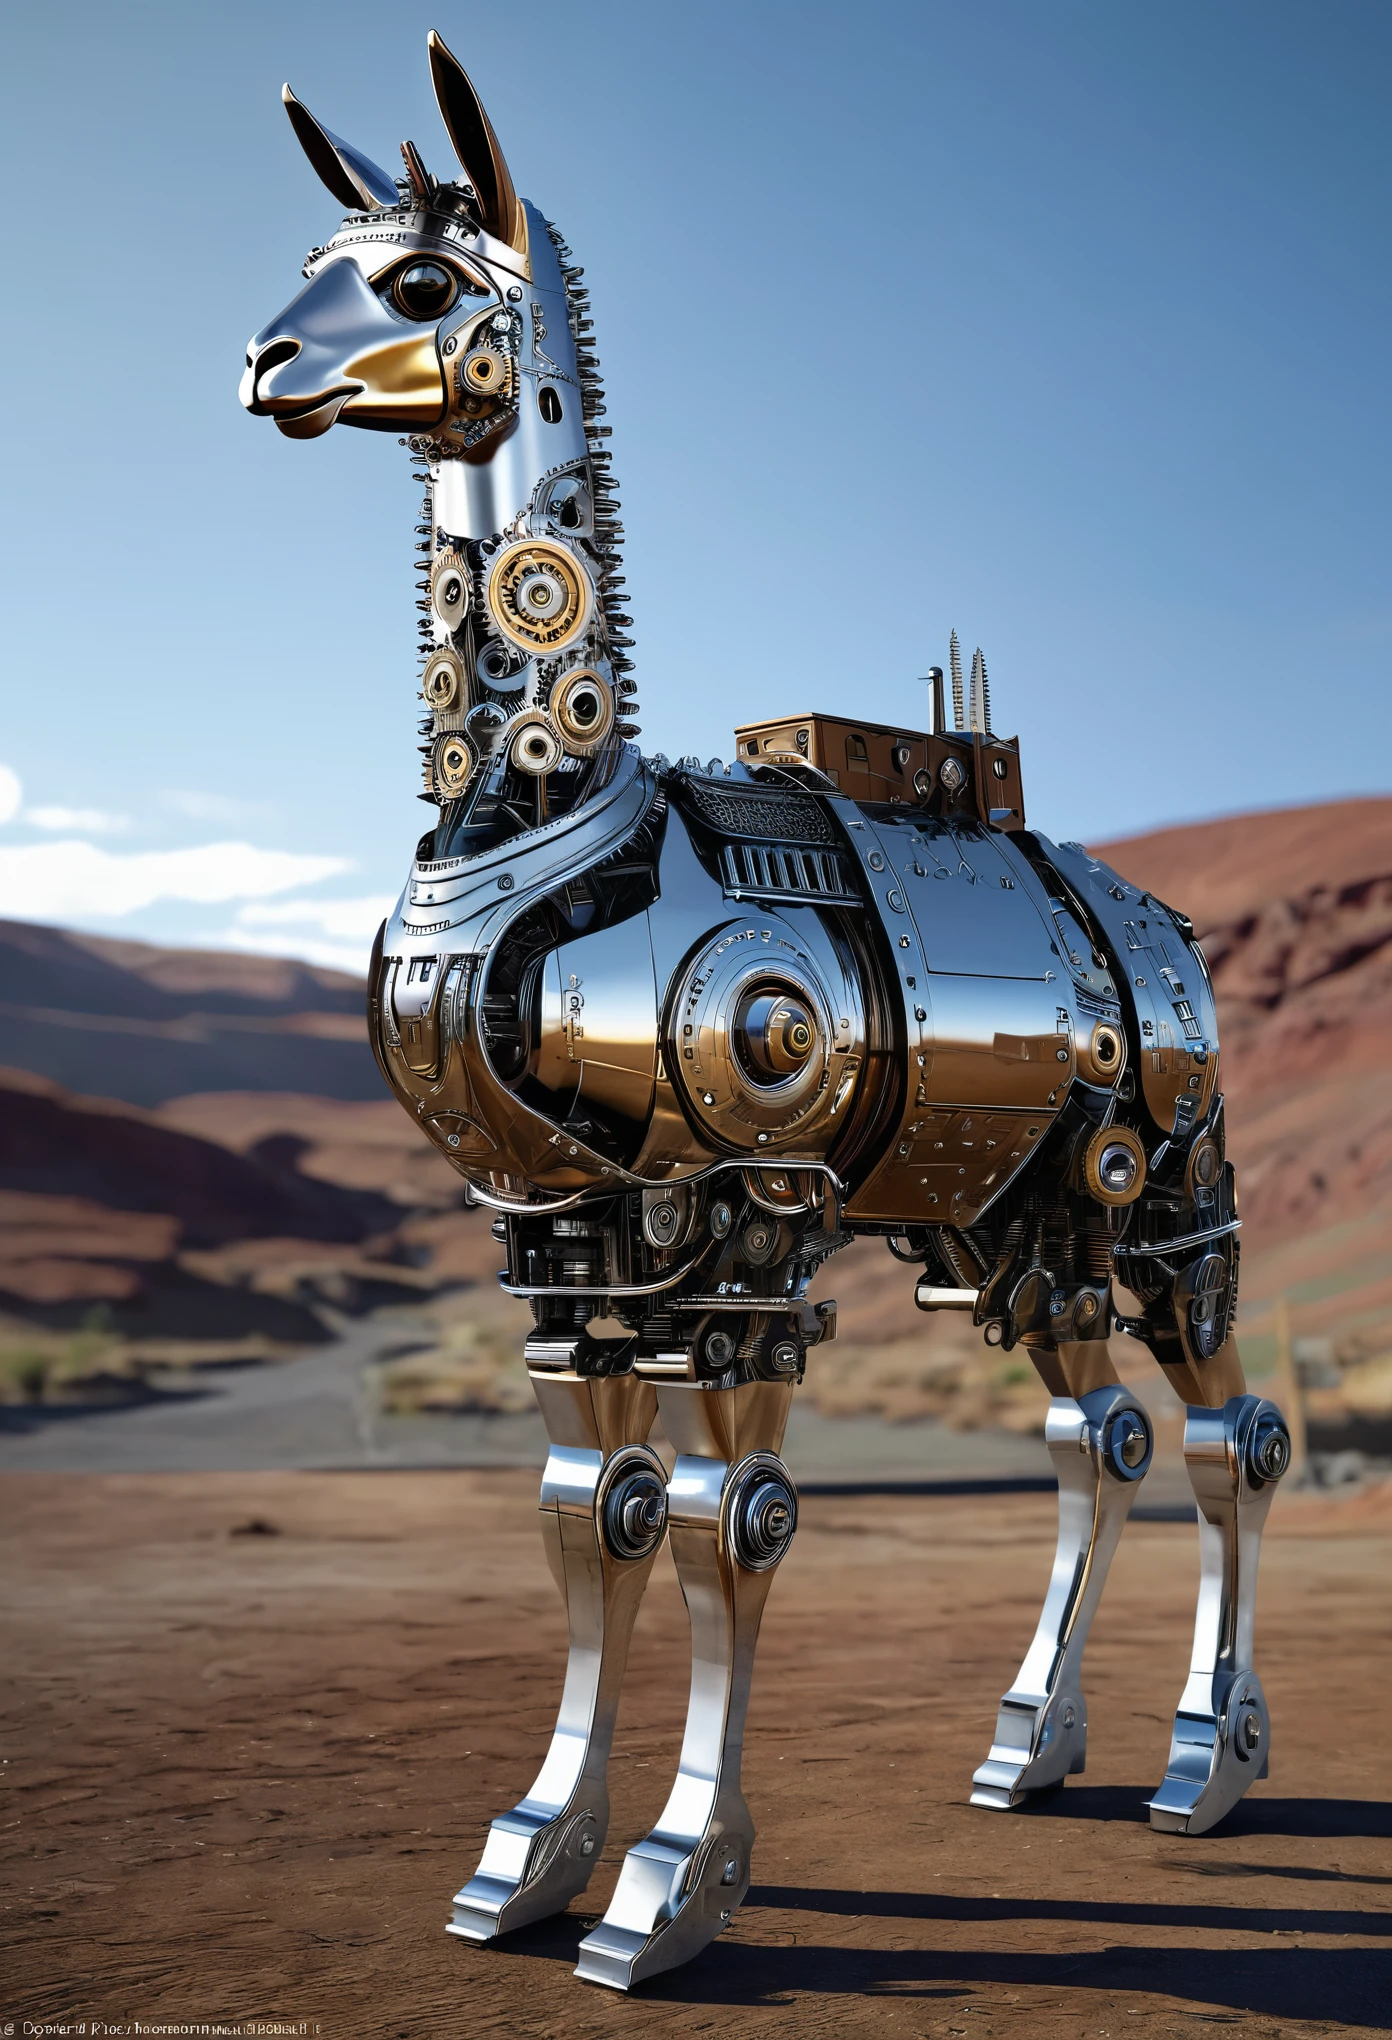 A detailed, realistic depiction of a mechanical llama. The llama is constructed from sleek, futuristic metal parts, with intricate gears and levers visible throughout its body. Its fur is replaced with sleek, shiny plating, and its eyes glow with a bright, artificial light. The llama stands tall and proud, displaying its mechanical magnificence in a desolate, industrial landscape